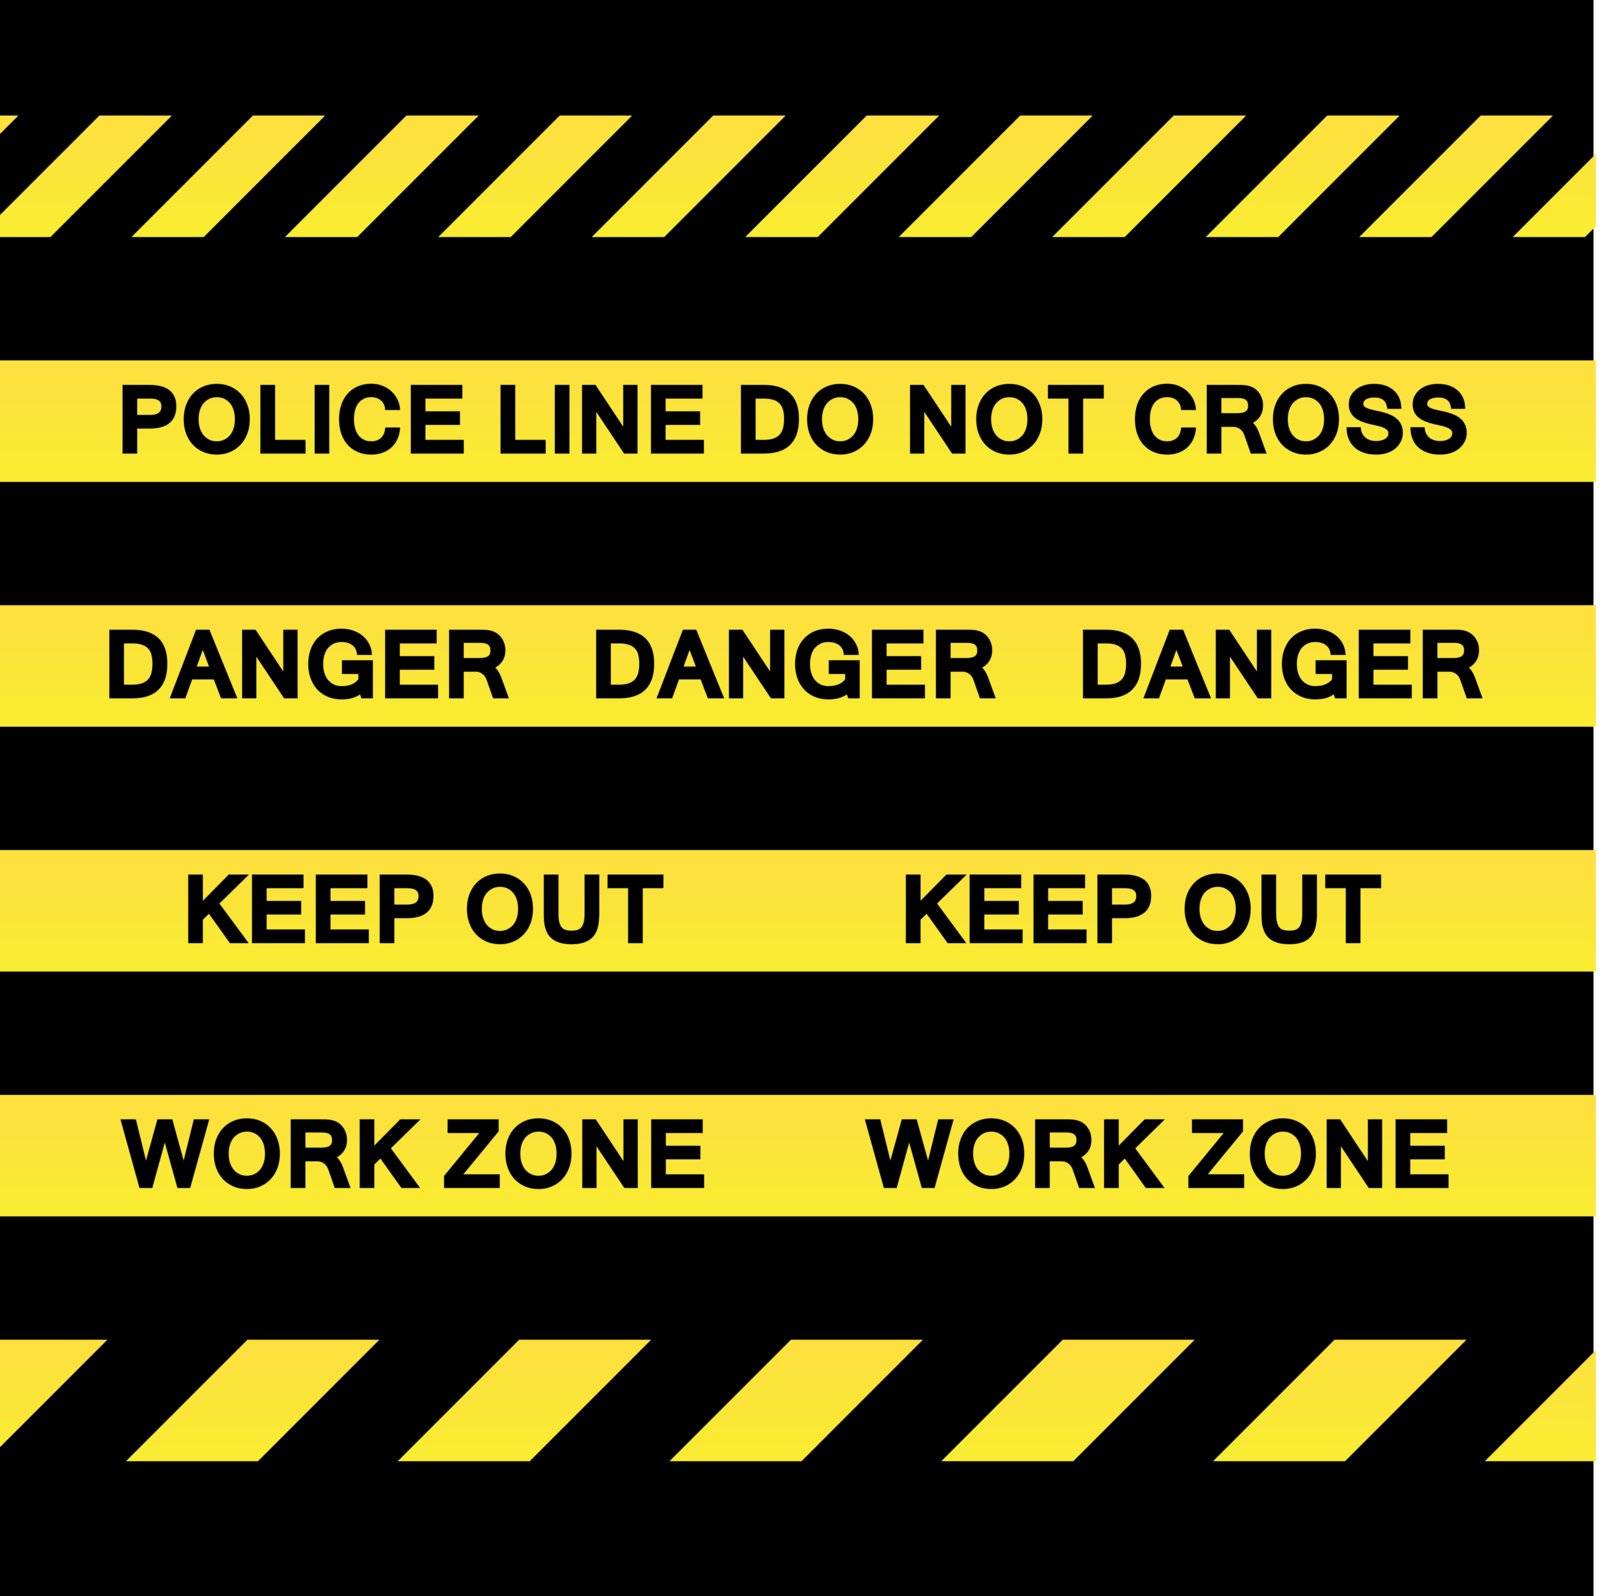 A variety of yellow caution tapes in vector format for construction and crime scene investigation concepts.